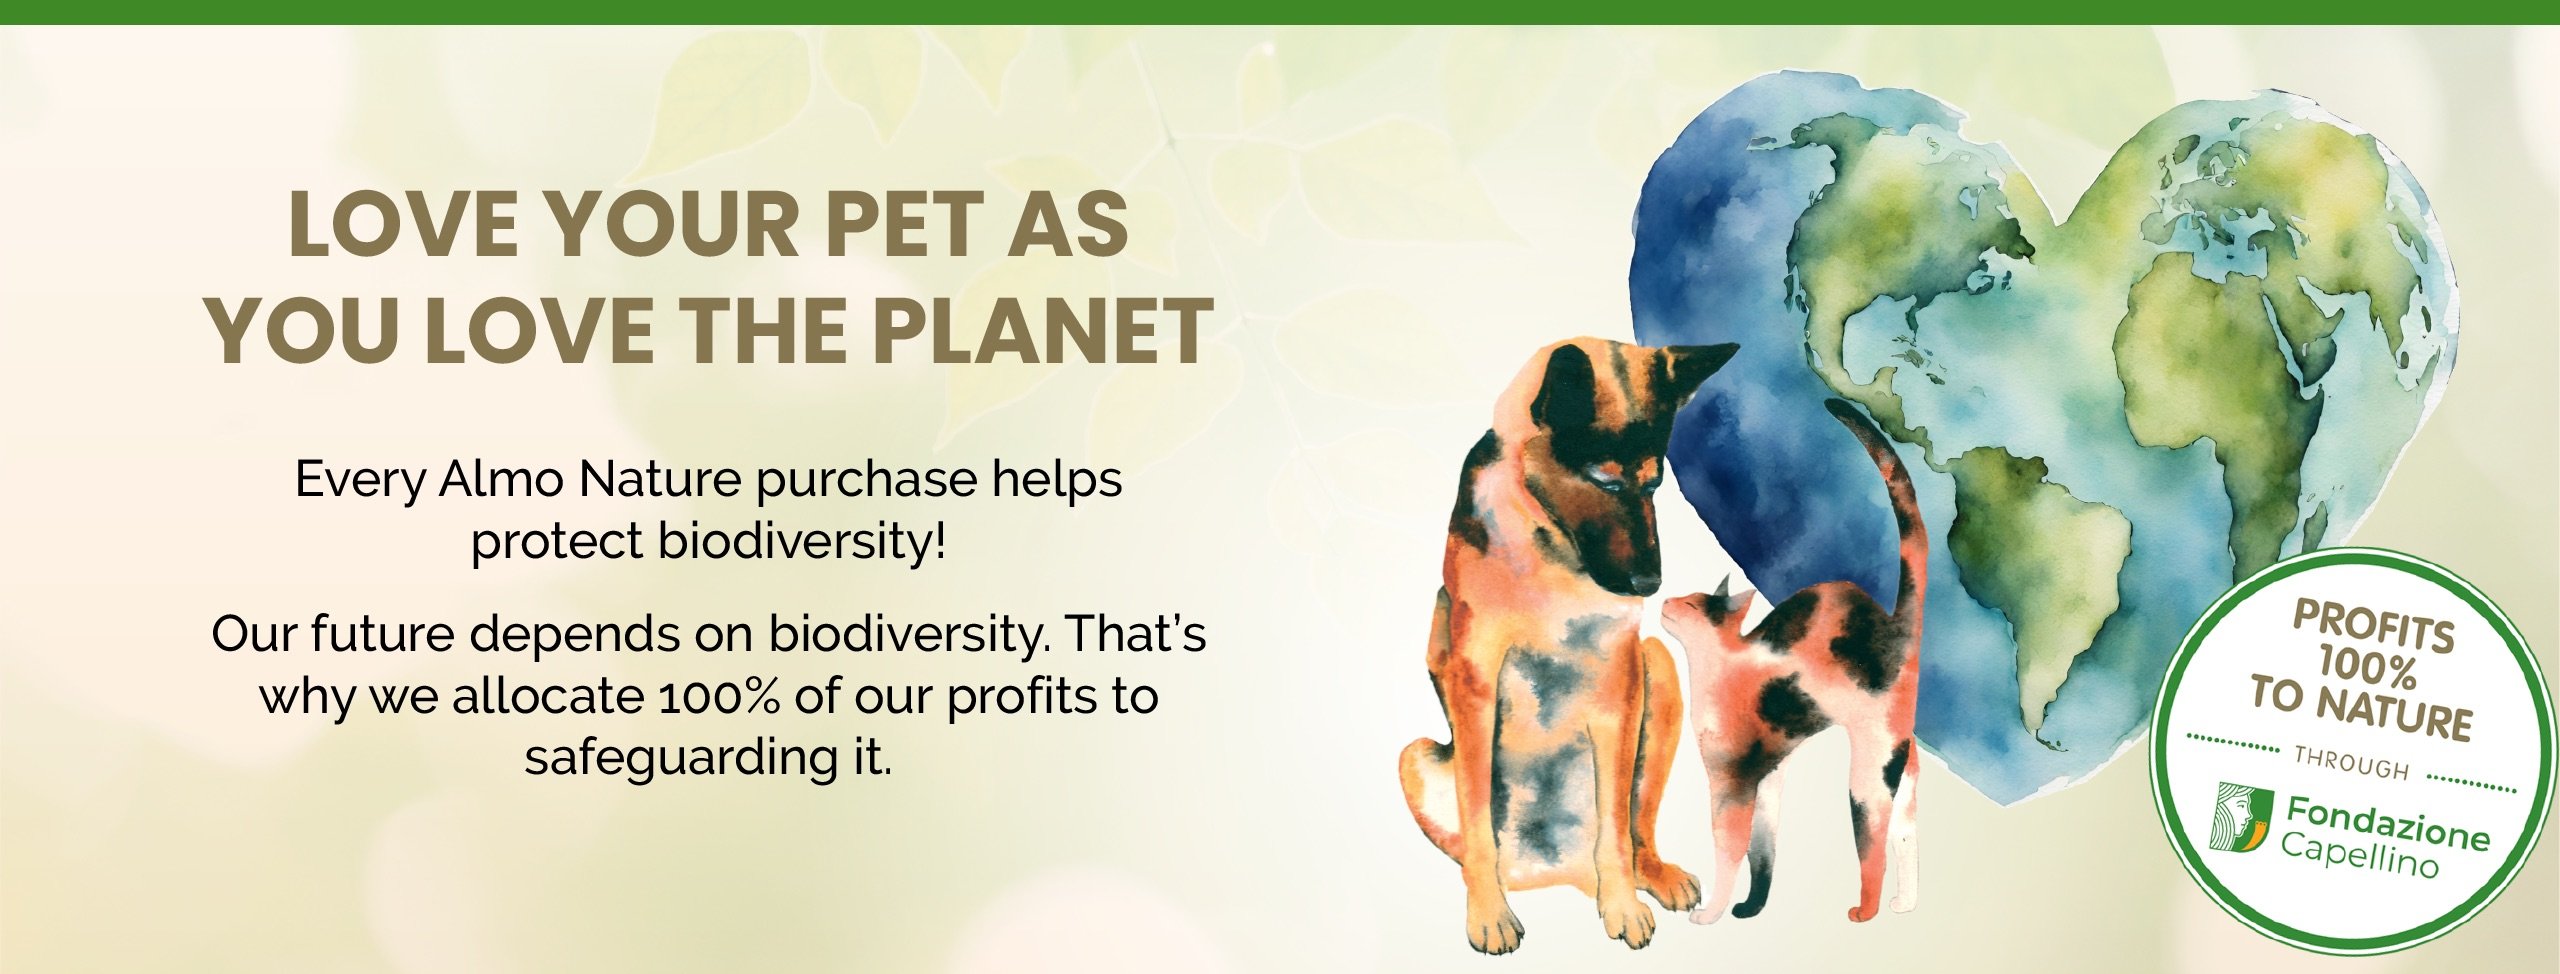 Love your pet as you love the planet - every almo nature purchase helps protect biodiversity! Our future depends on biodiversity. That's why we allocate 100% of our profits to safeguarding it.